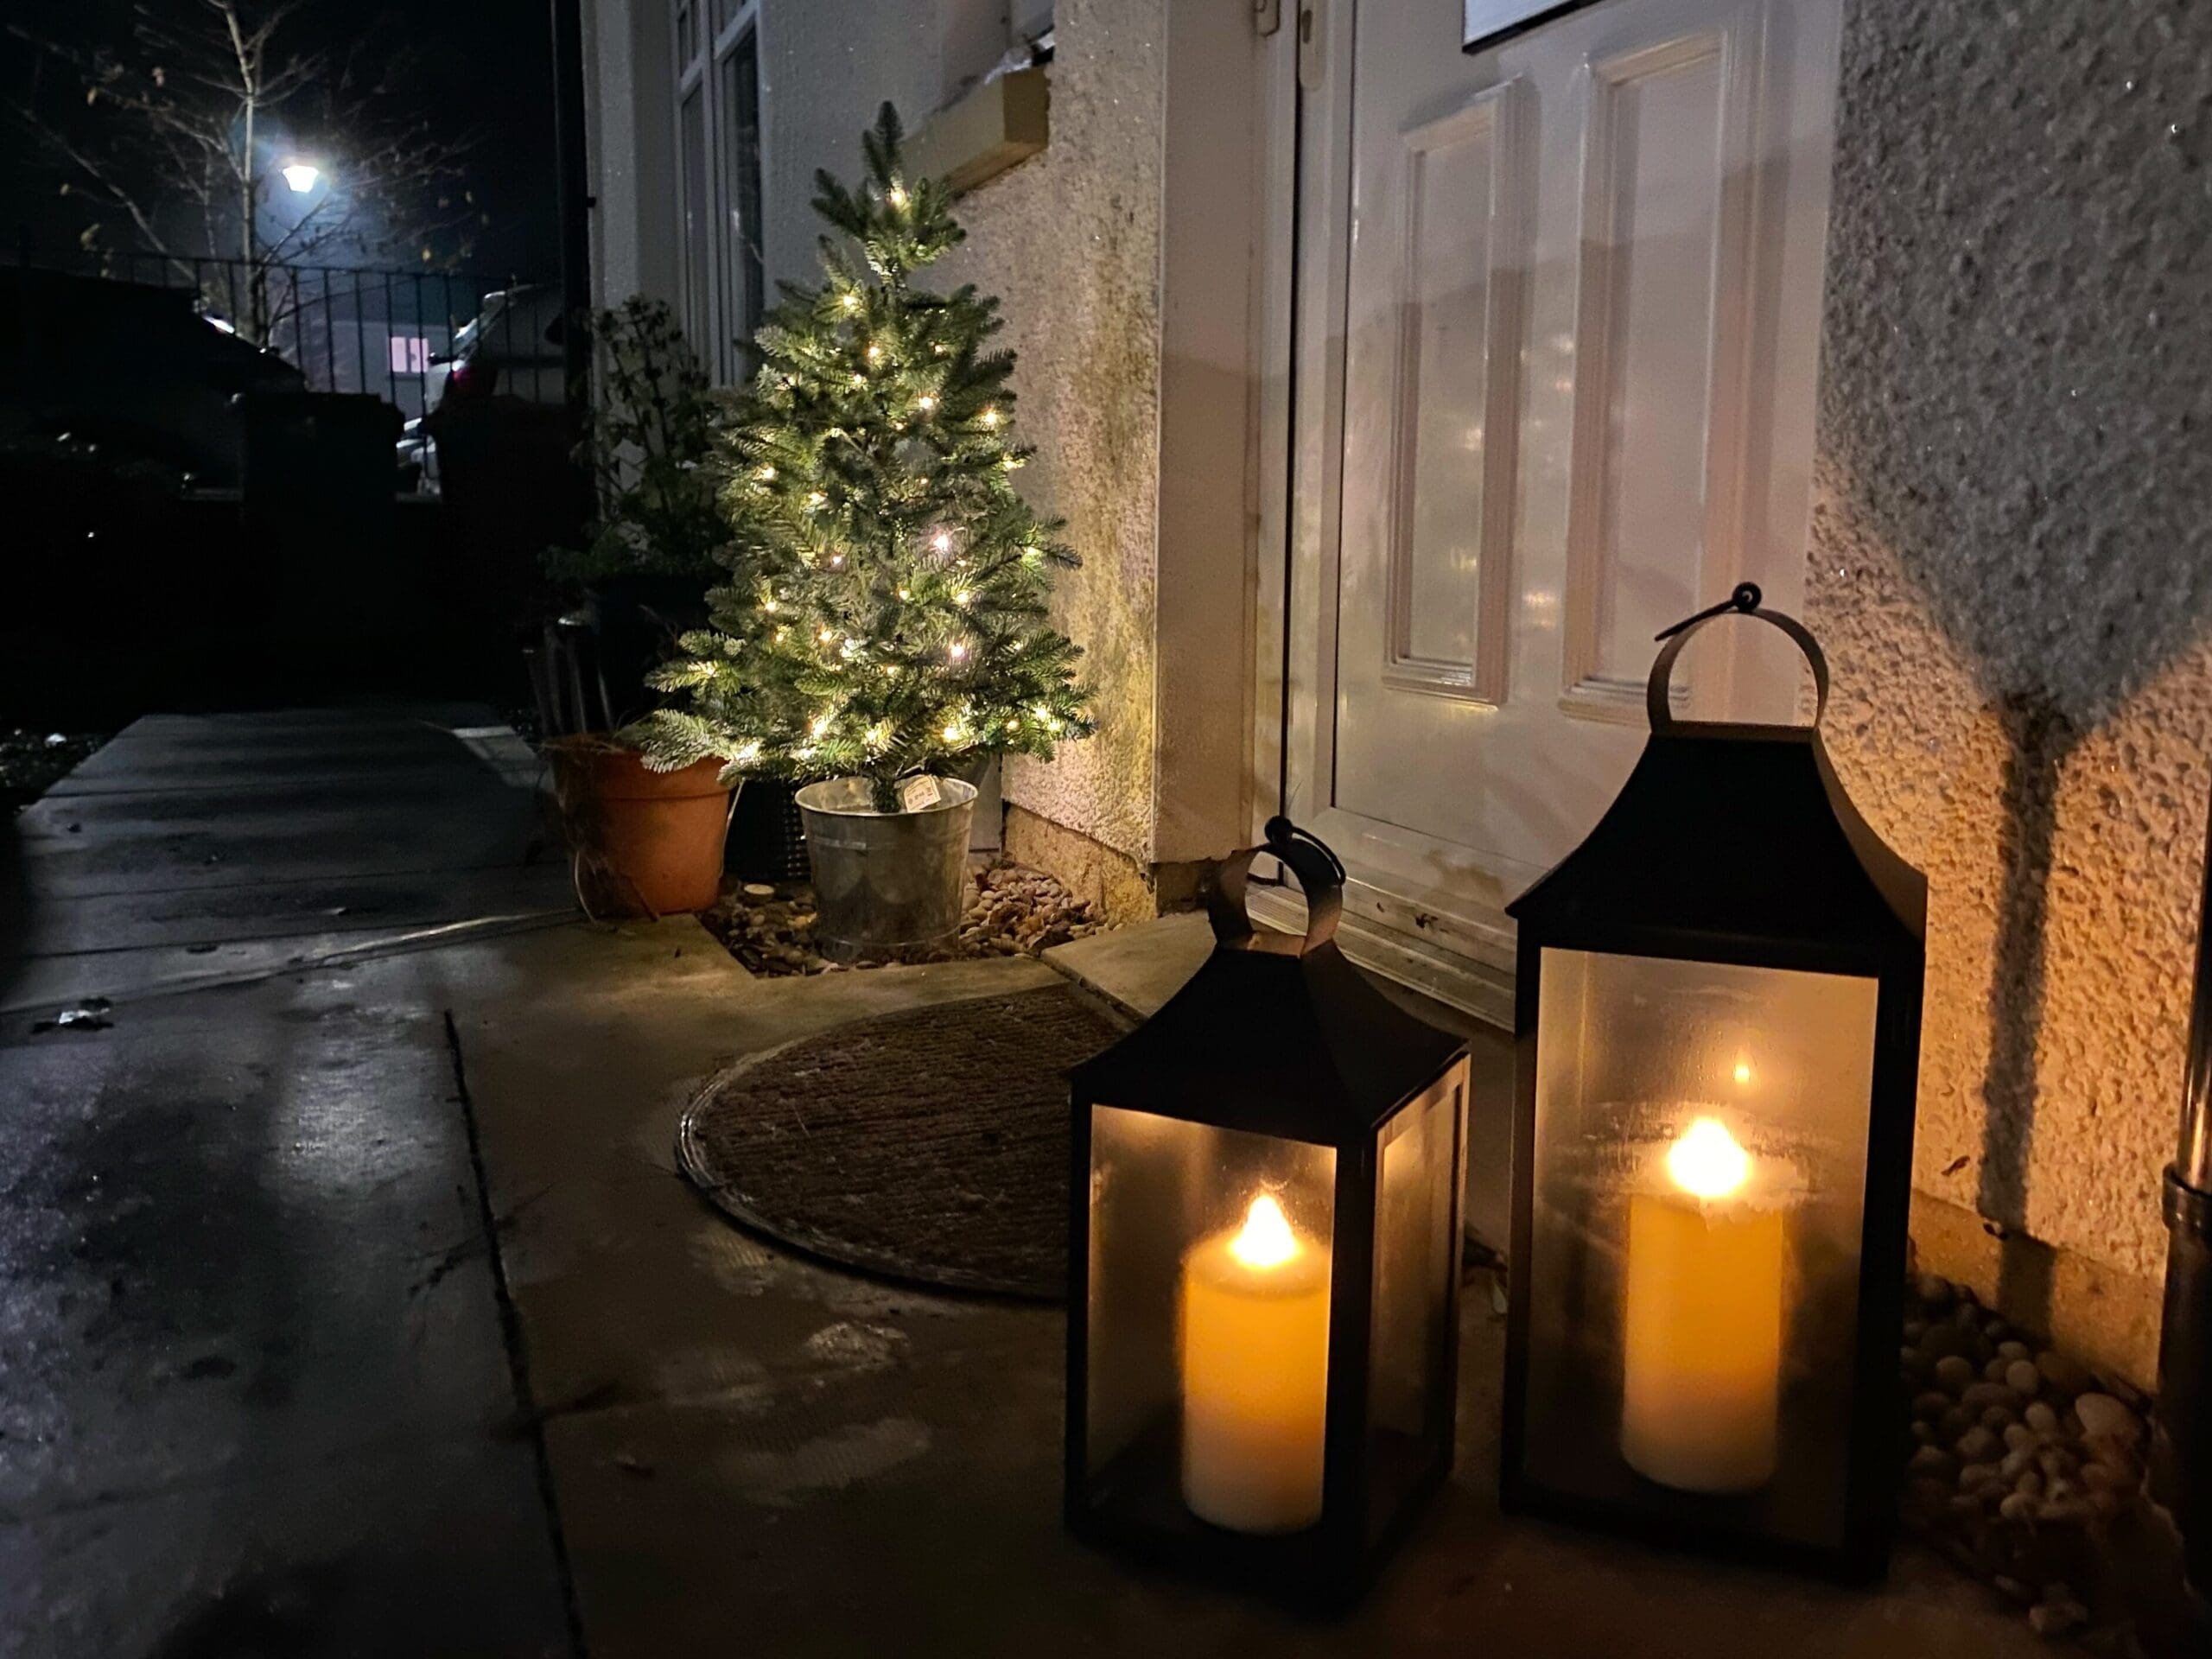 Battery powered lantern lights and Christmas tree outside a door